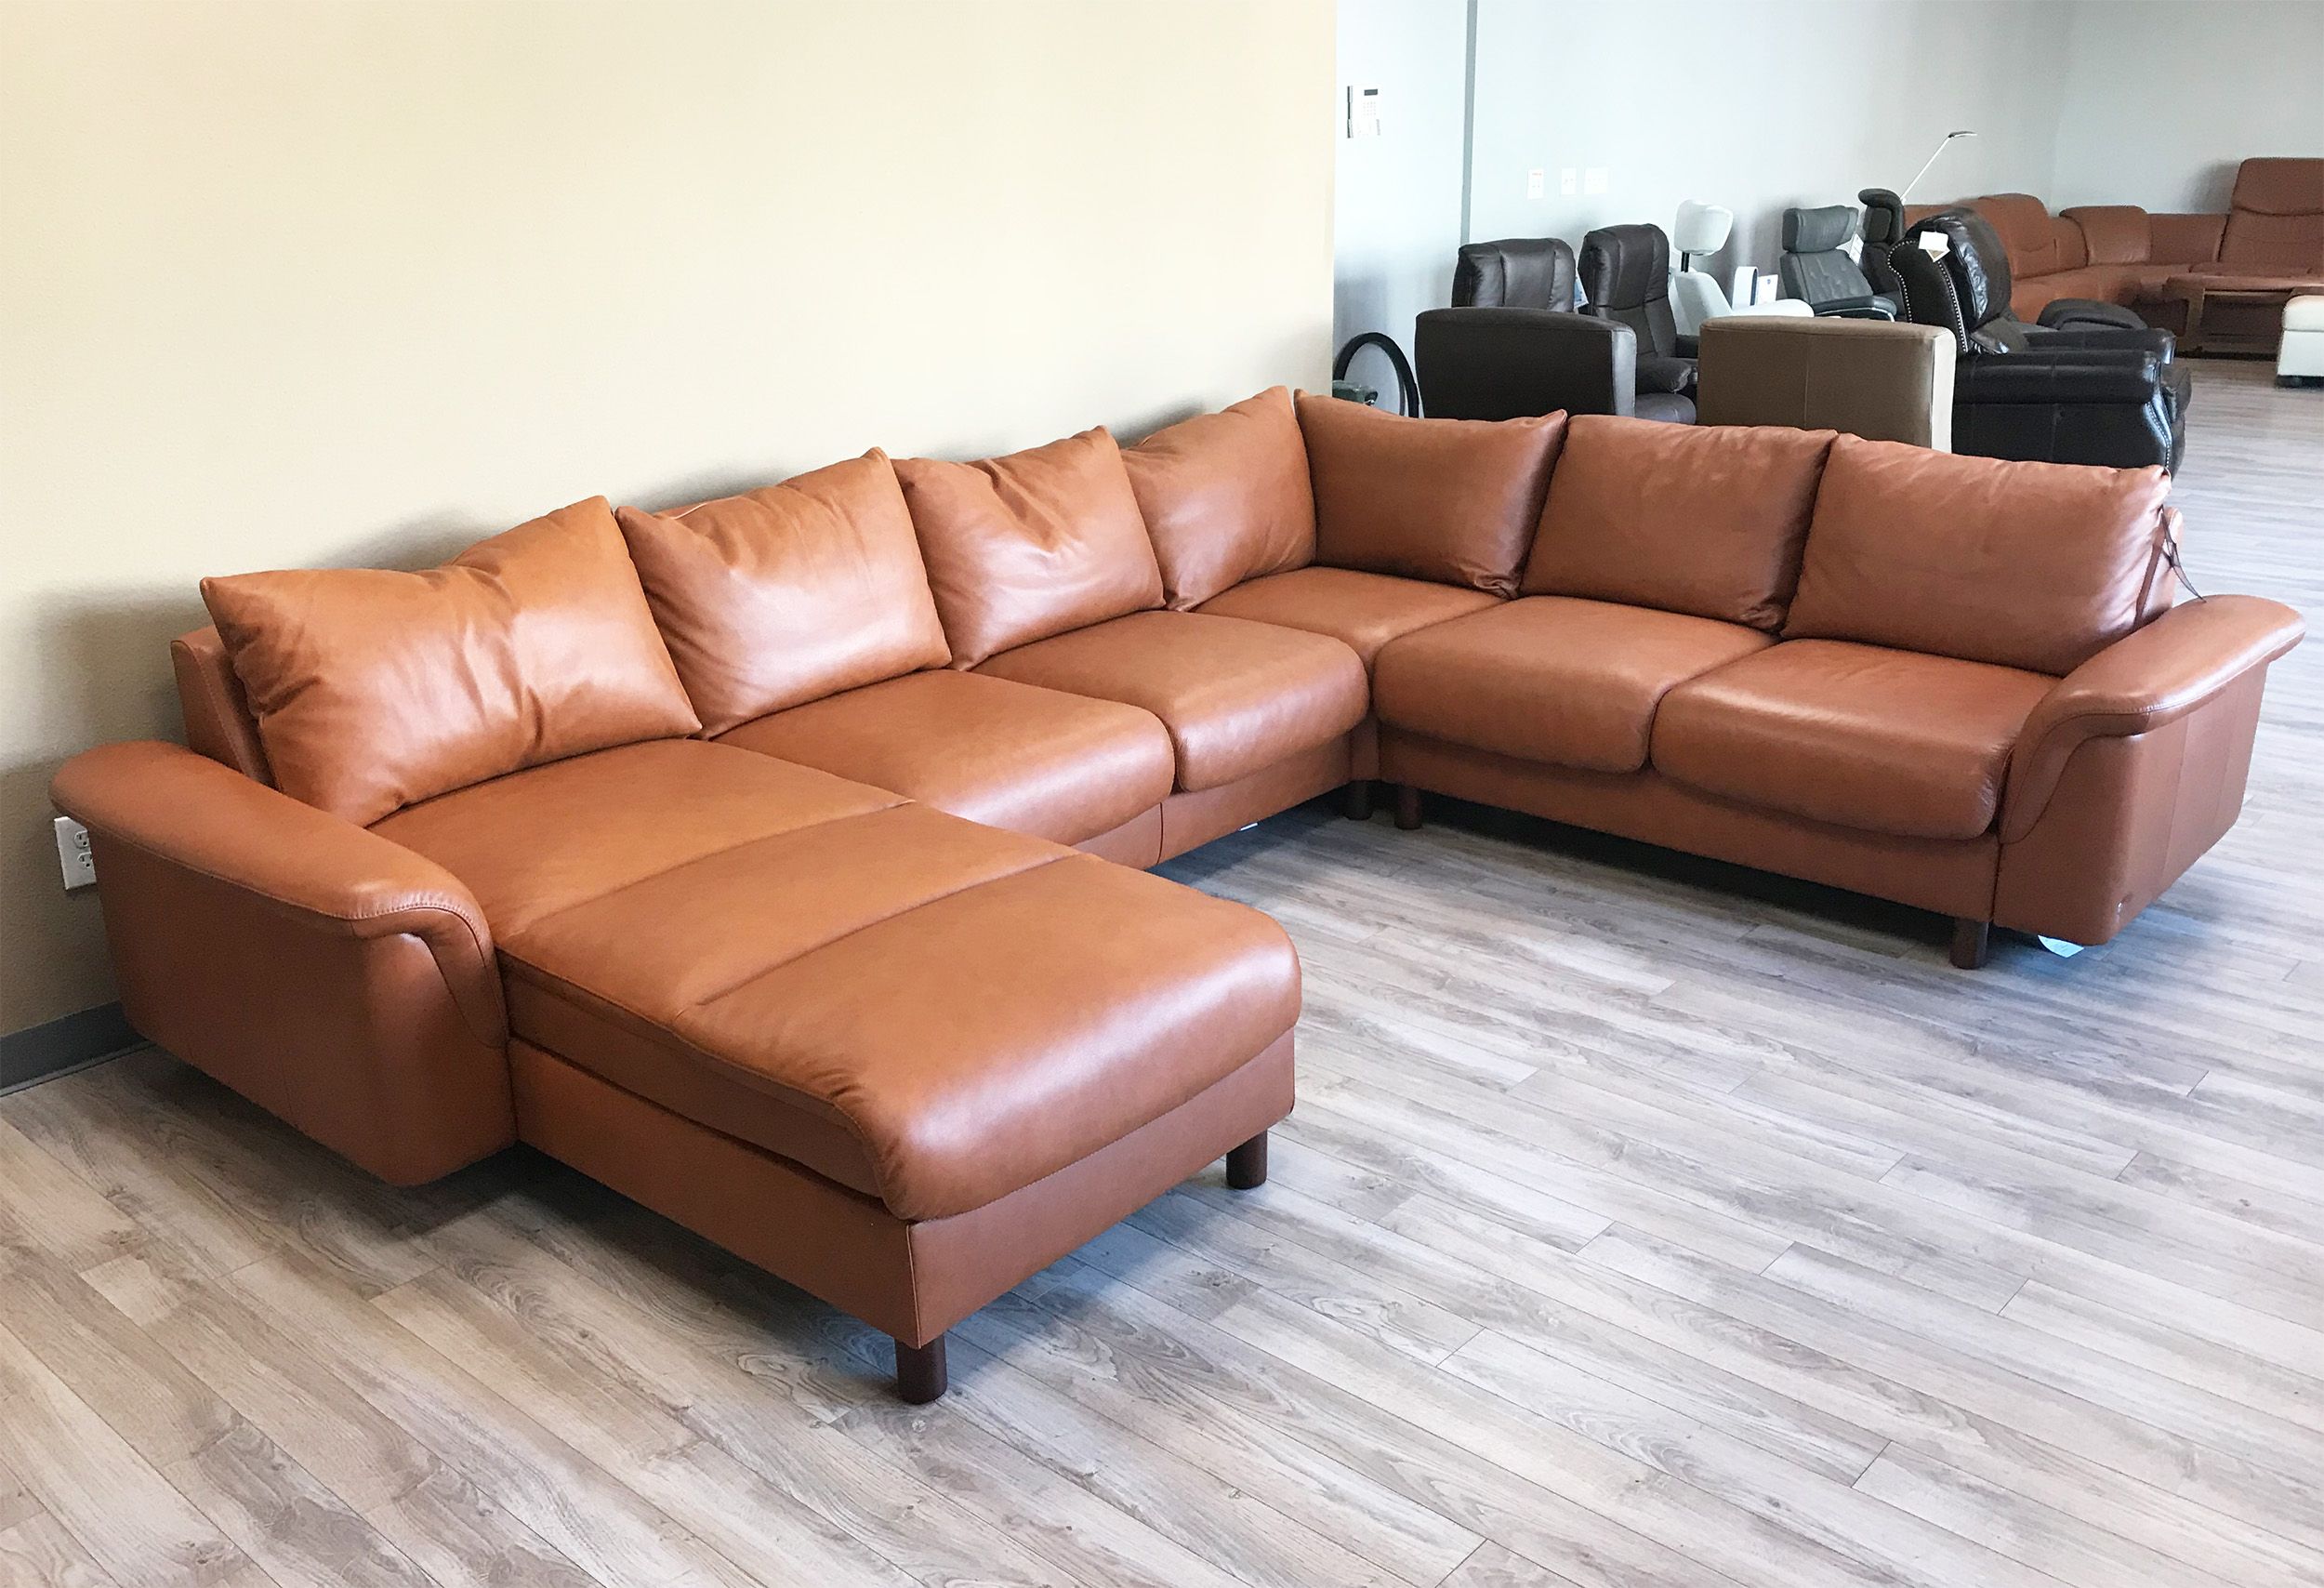 Stressless E300 6 Seat Sectional Sofa With Longseat In Royalin Tigereye  Leatherekornes – Stressless E300 3 Seat Sofa Intended For 6 Seater Sectional Couches (View 14 of 15)